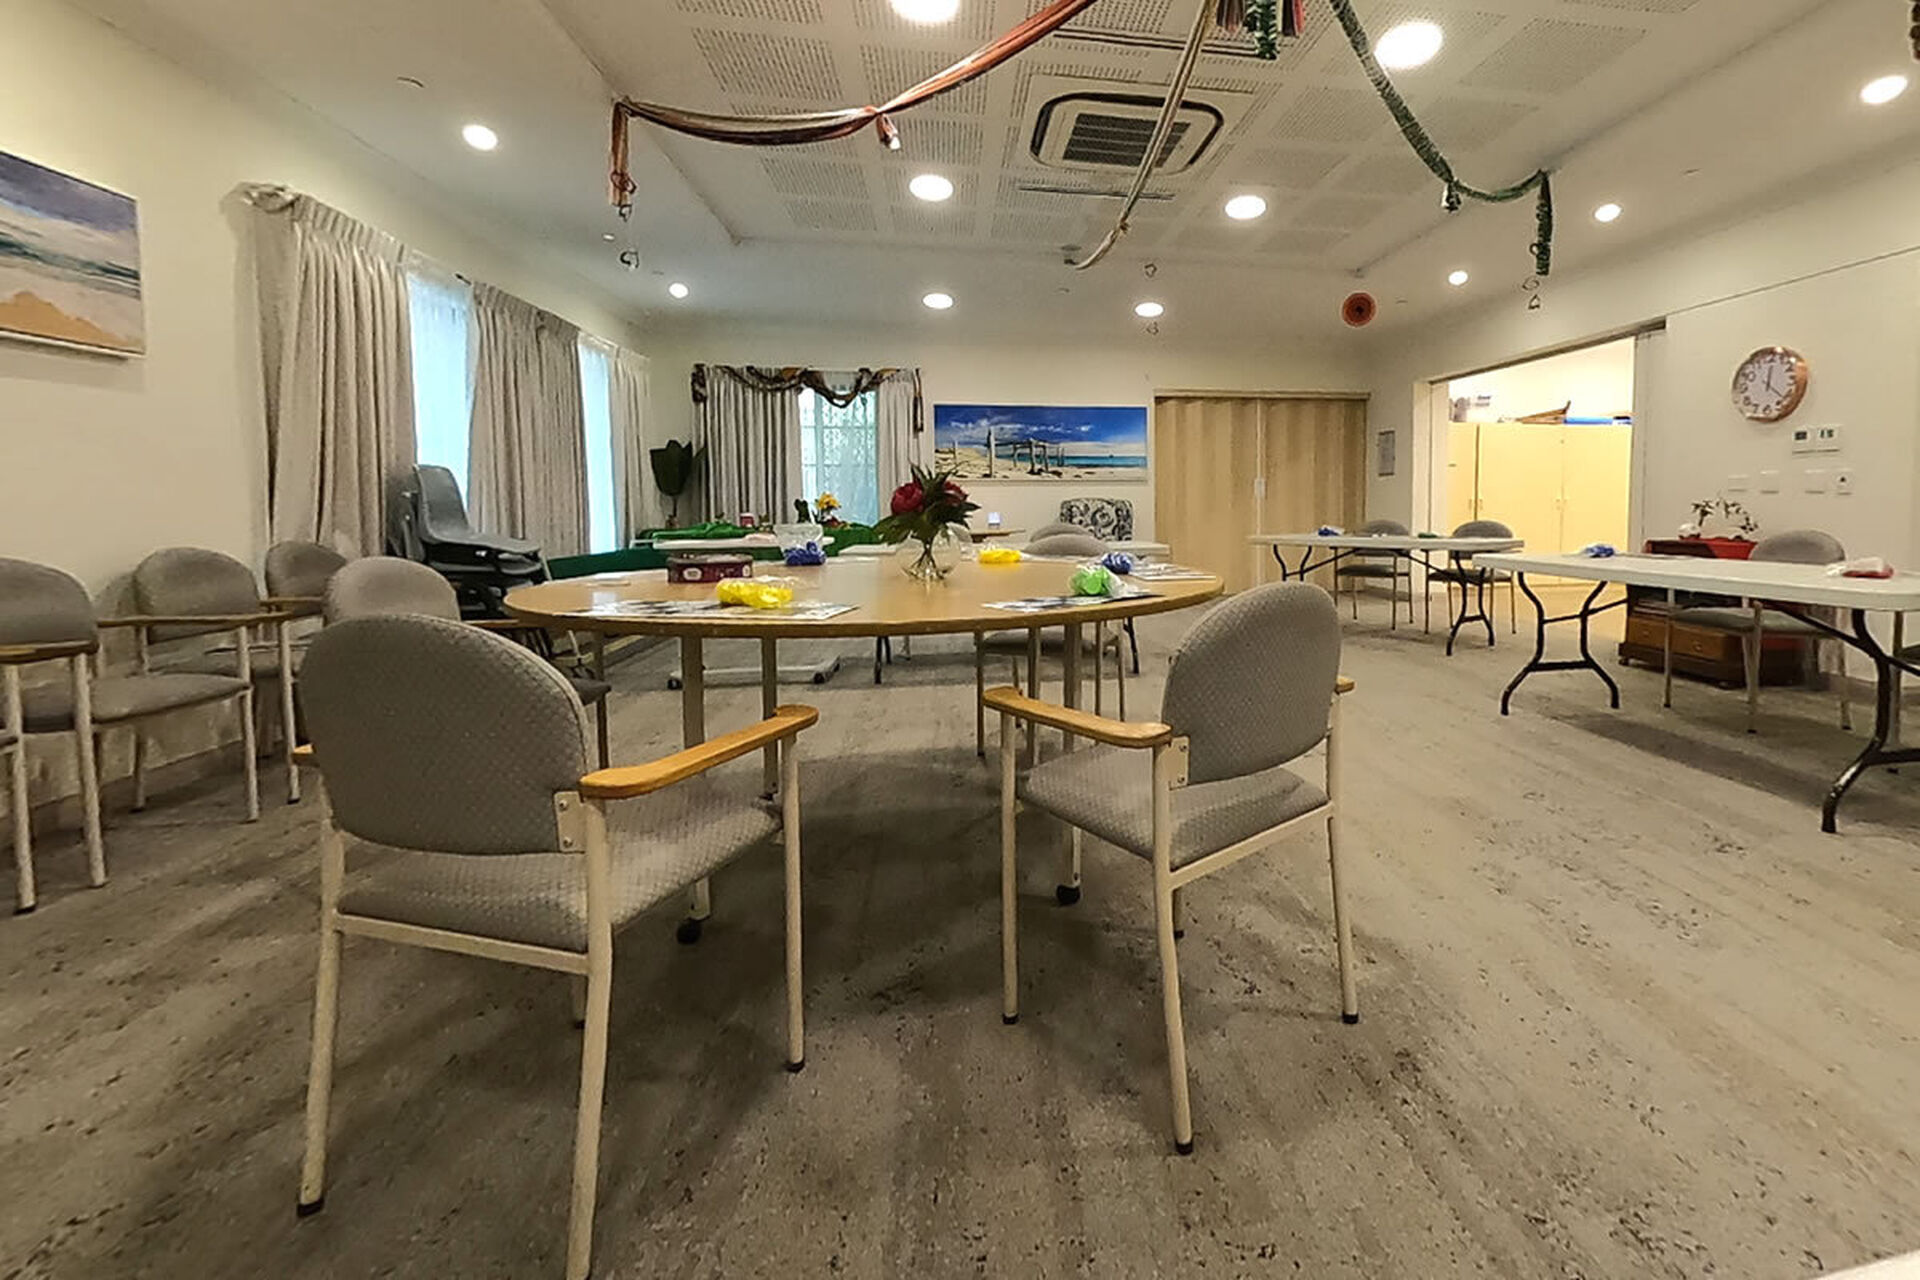 modern activities room for nursing home residents at baptistcare william carey court aged care home in busselton wa